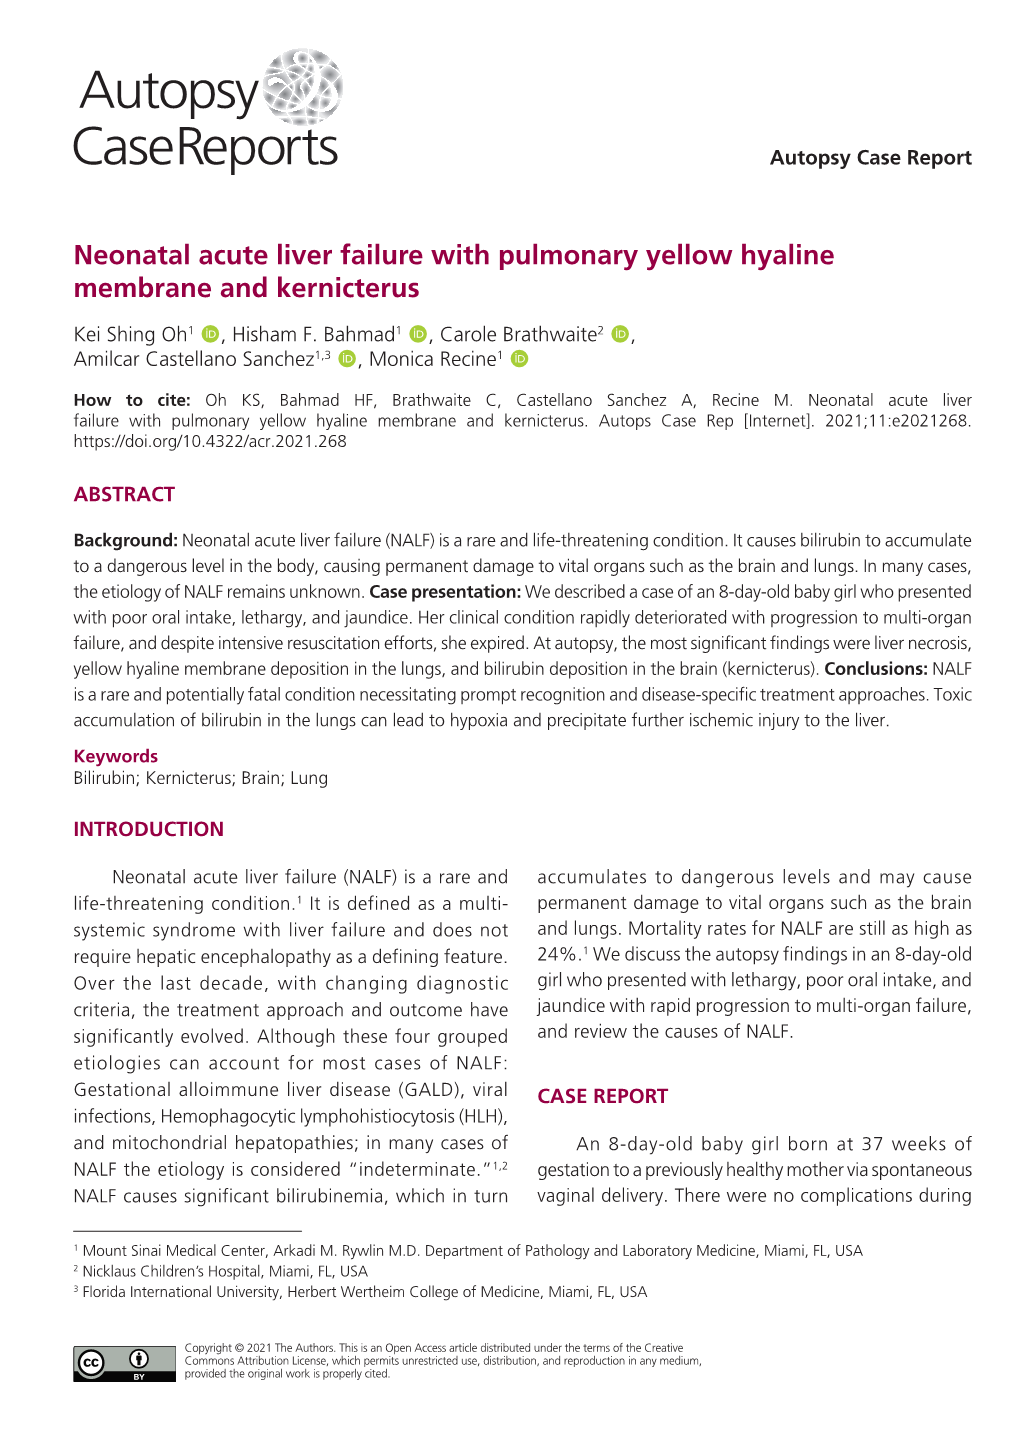 Neonatal Acute Liver Failure with Pulmonary Yellow Hyaline Membrane and Kernicterus